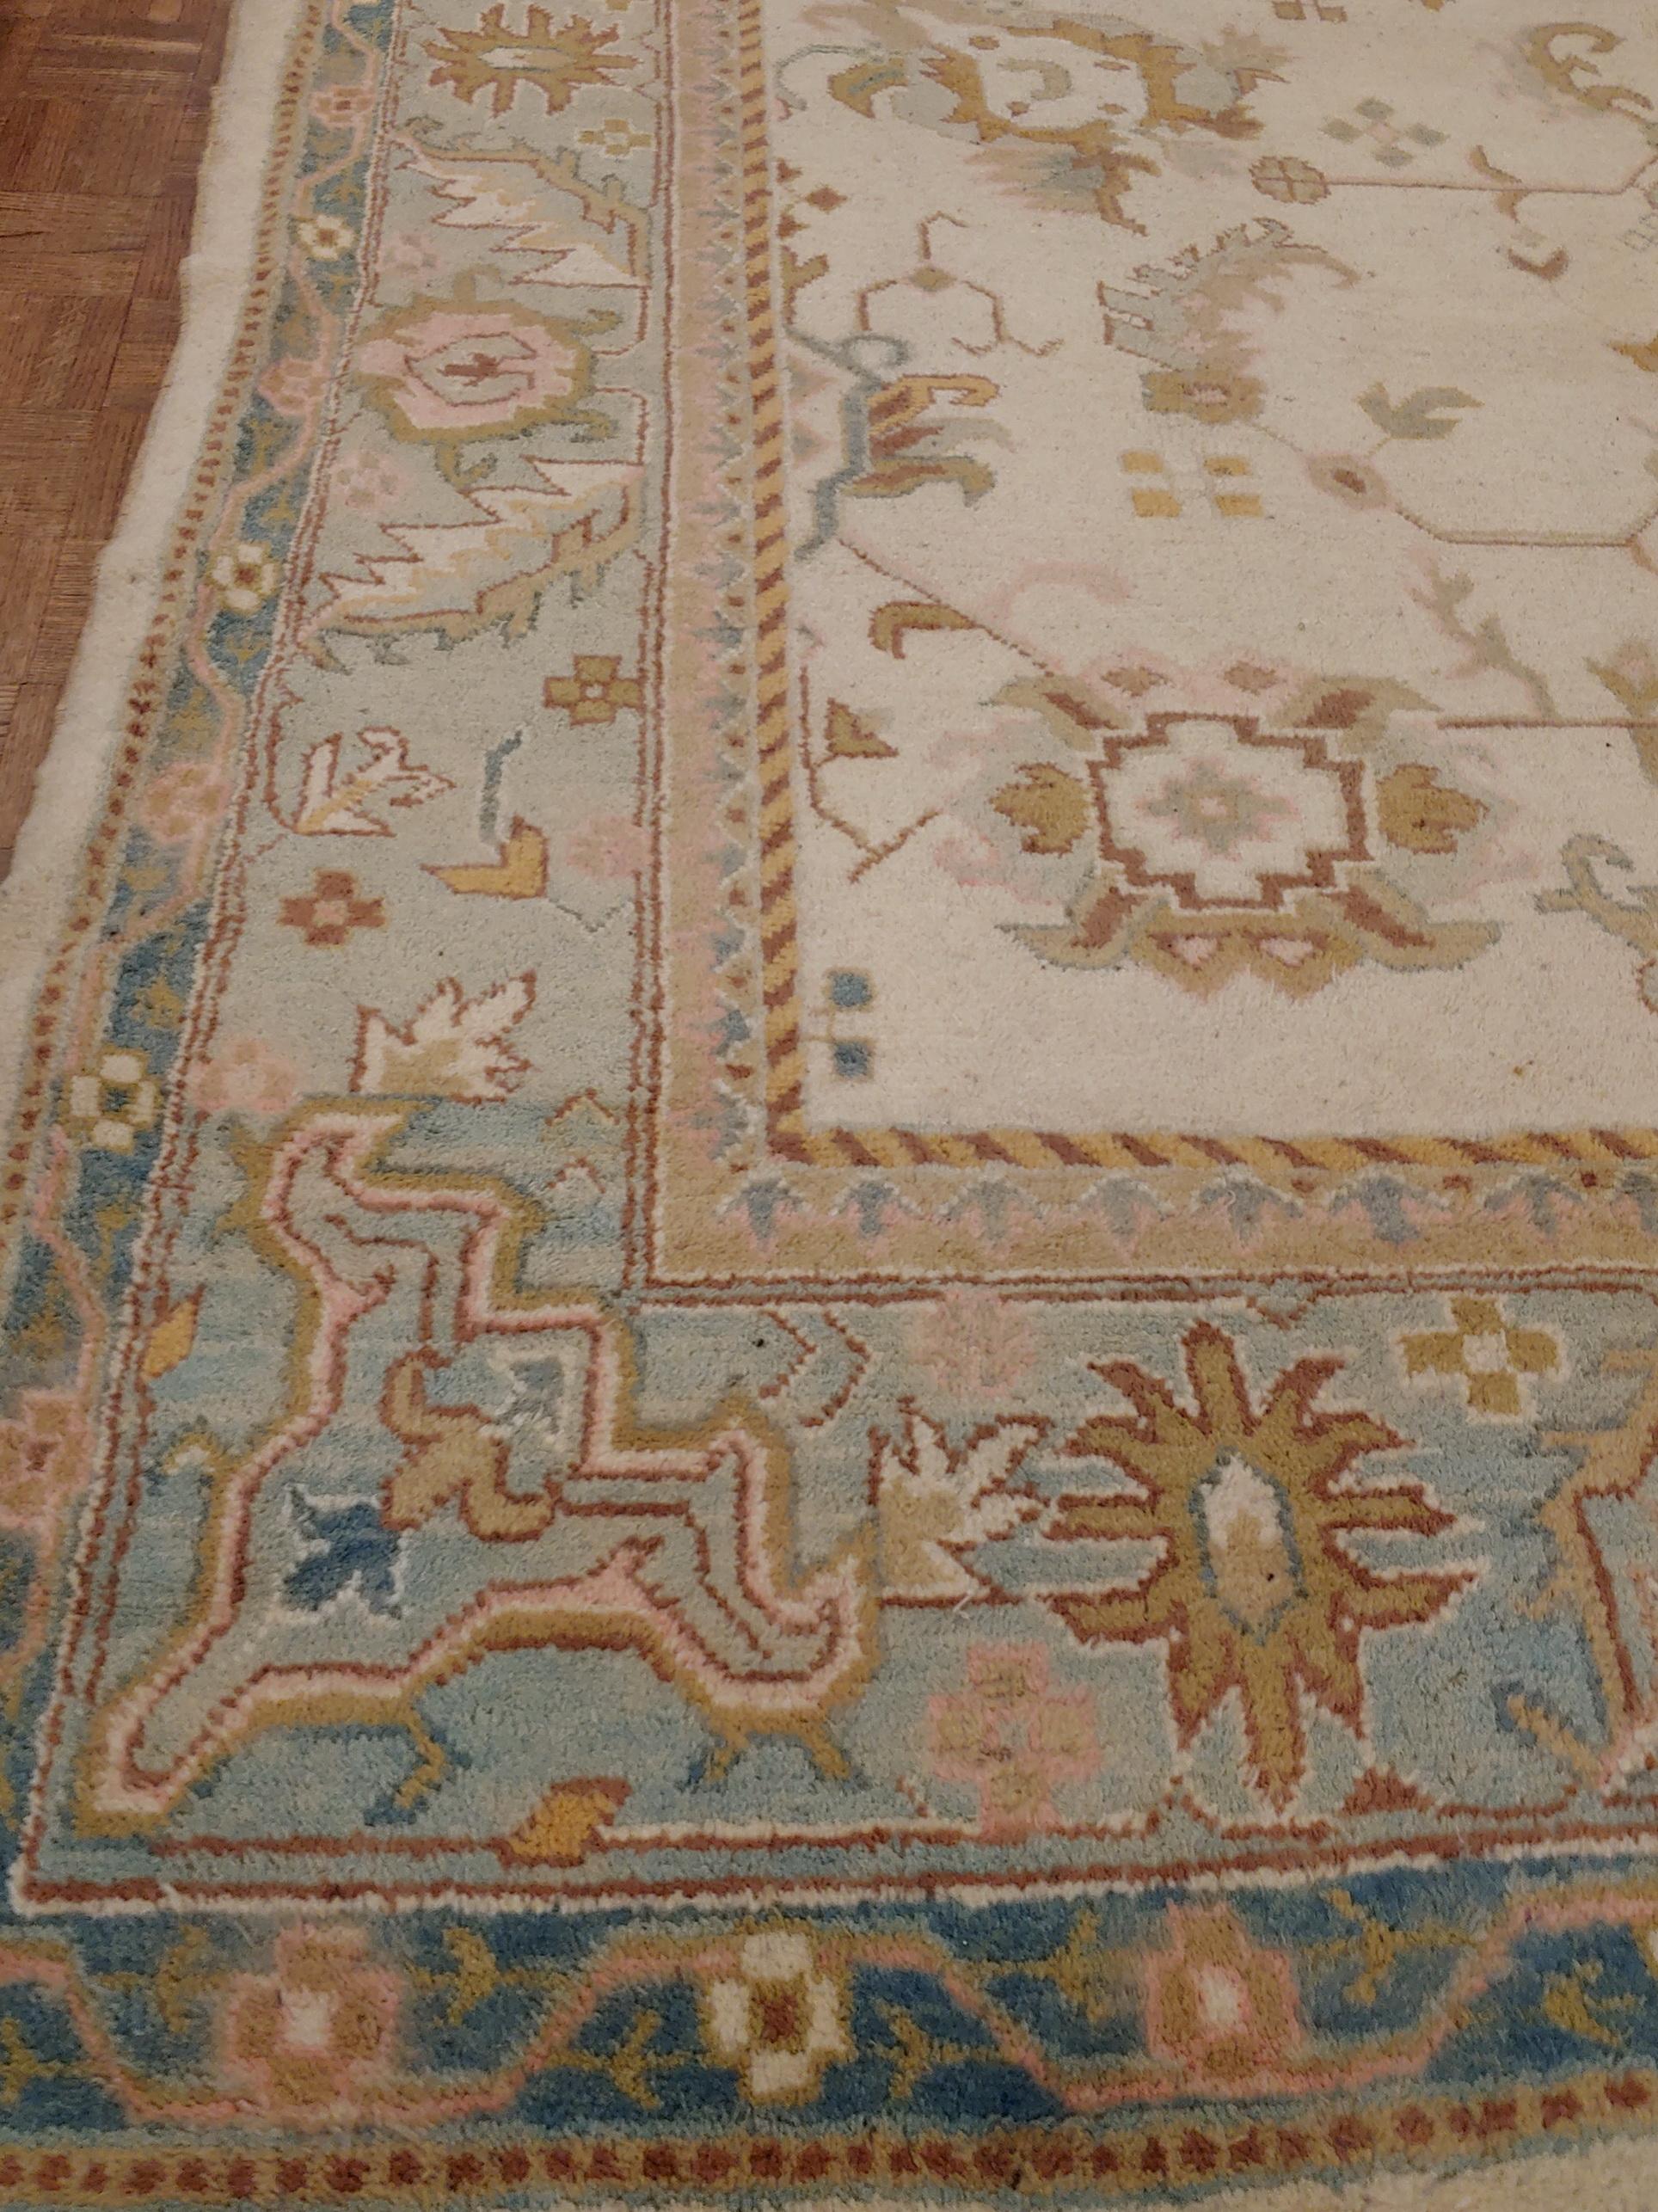 Woven Semi-Antique Indian Agra Rug, Ivory Colored, Wool, 1920 For Sale